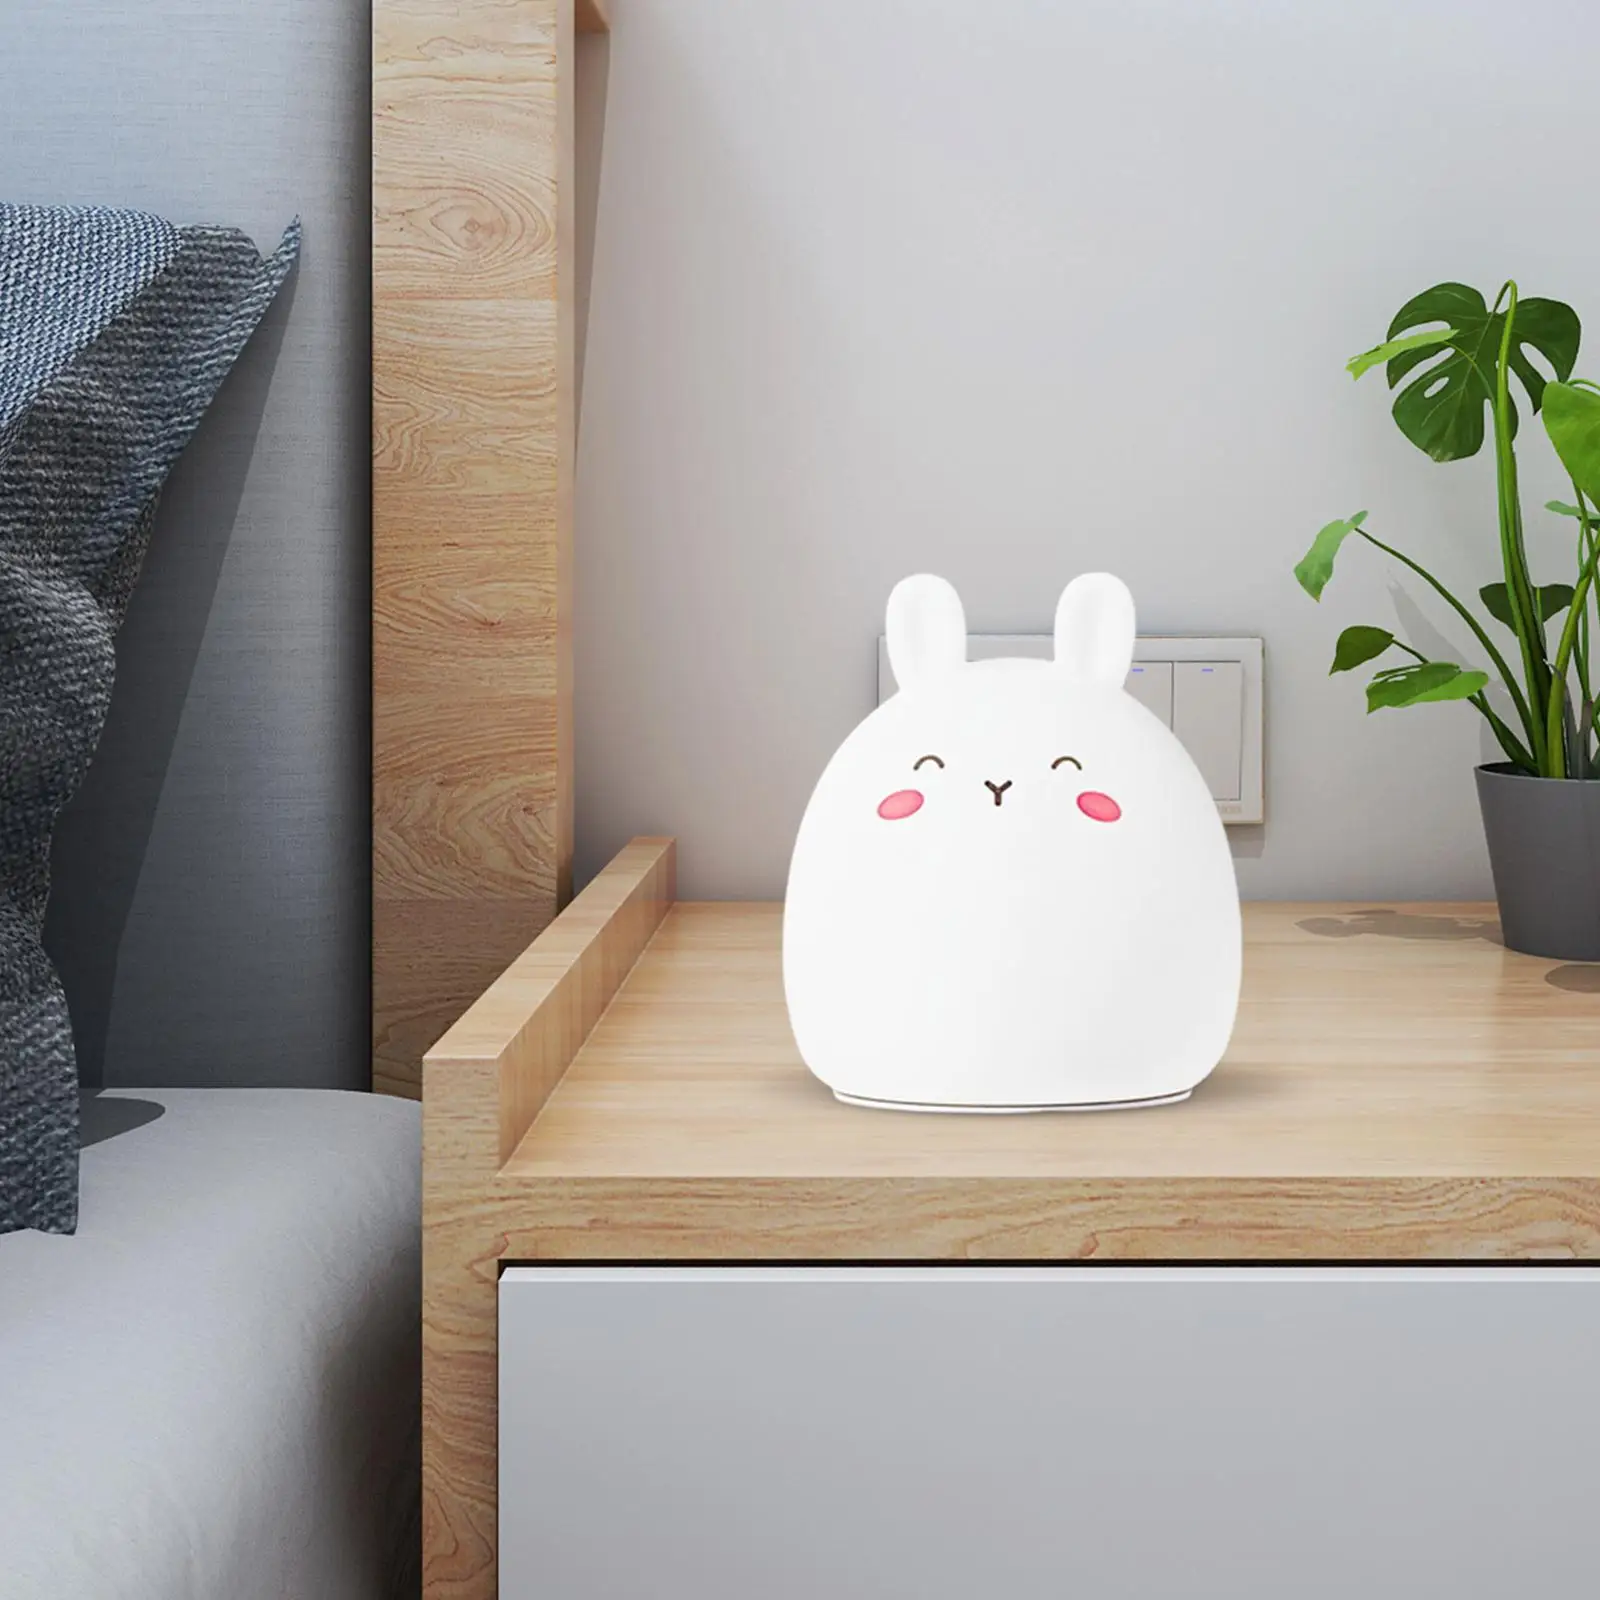 LED Bunny Night Light Portable Touch Control Nightlight Color Changing Table Lamp Rabbit Lamp for Kids Baby Breastfeeding Decor